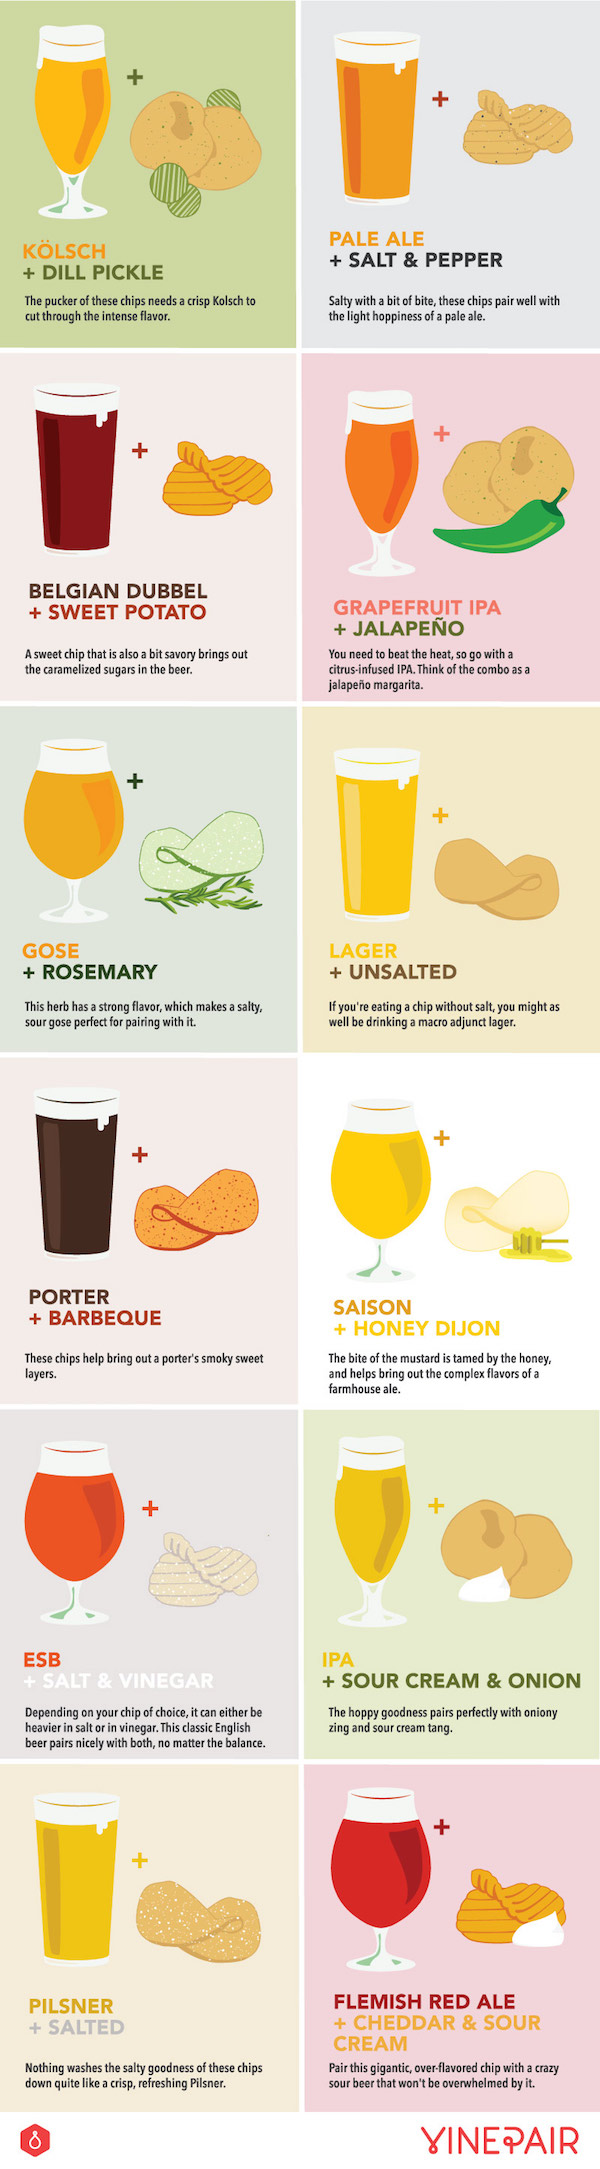 food and beer pairings infographic - potato chips